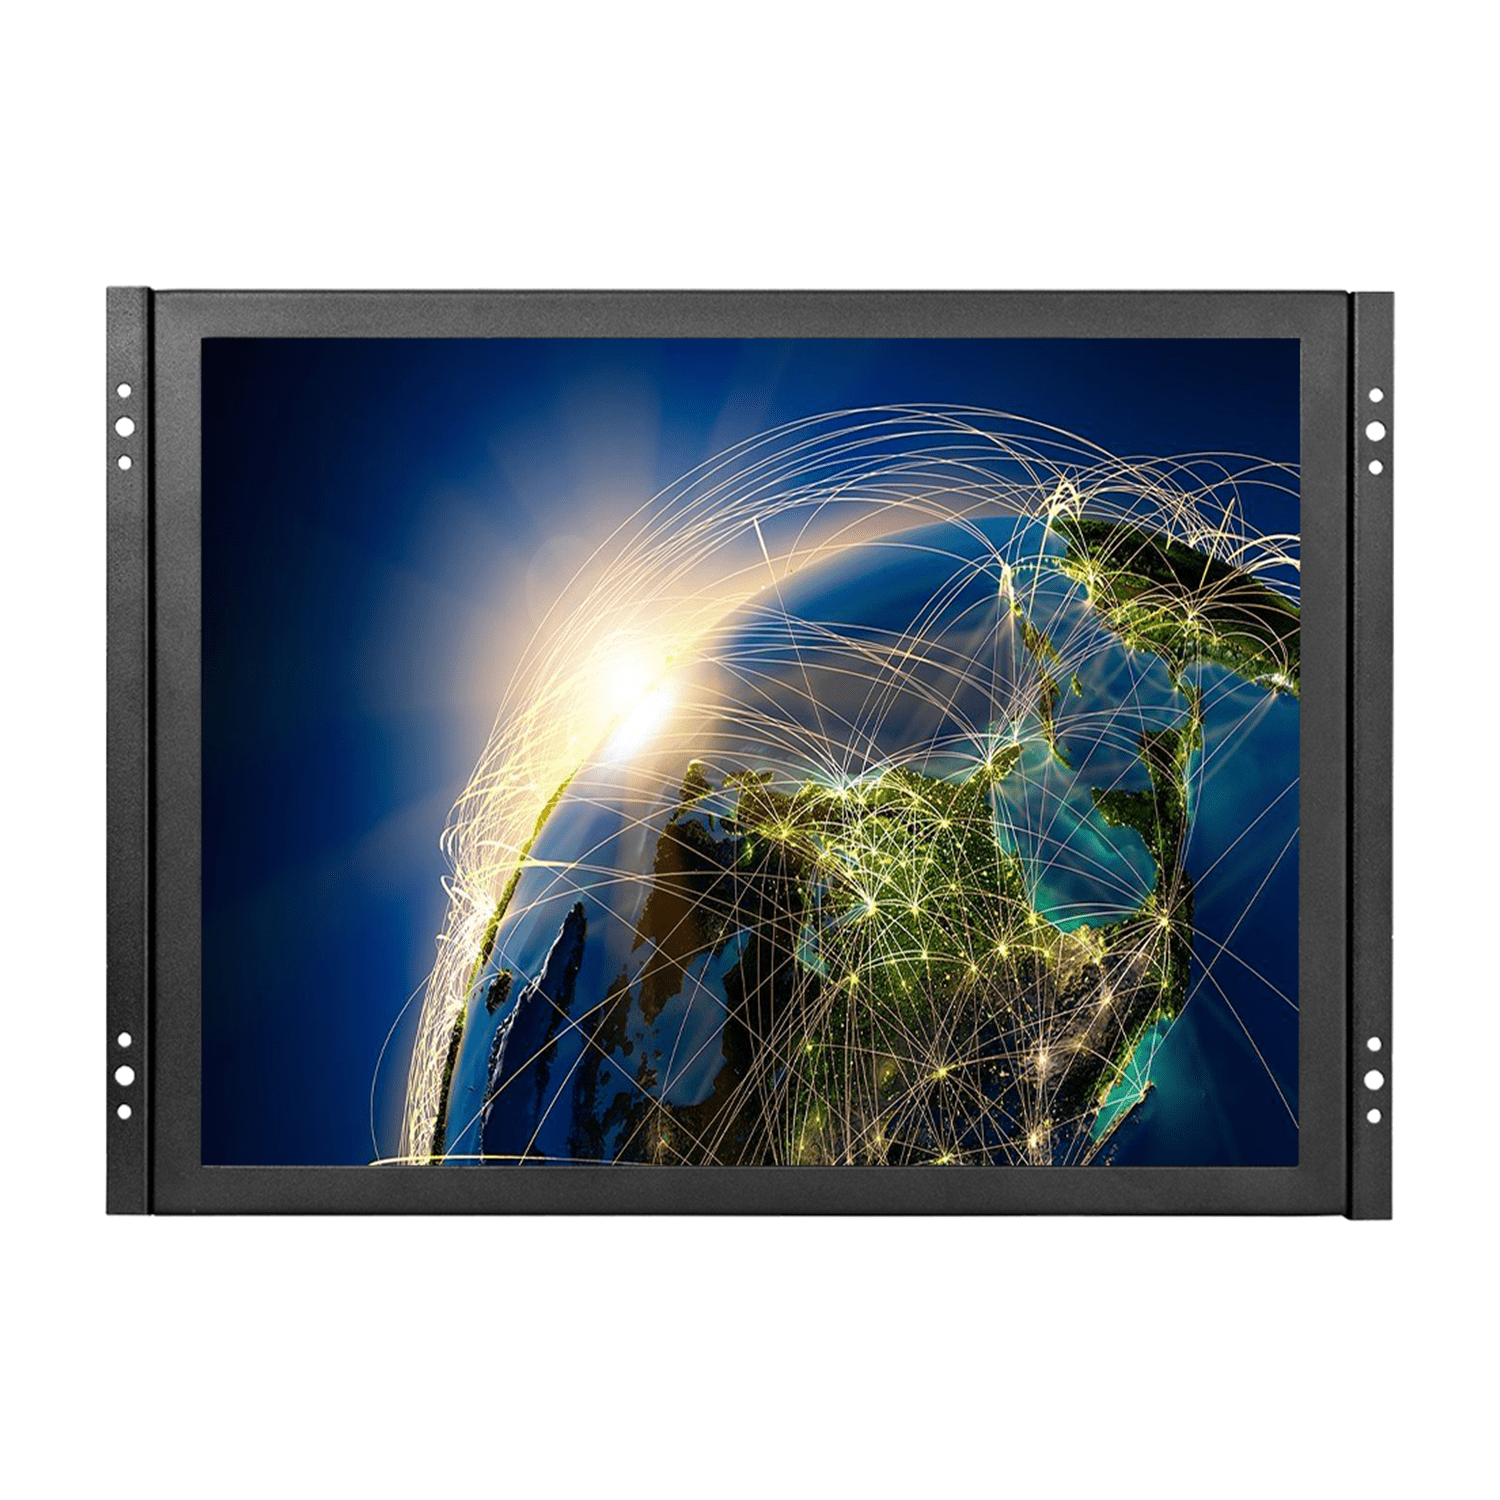 8 inch high-definition industrial touch open VGAHDMI LCD monitor